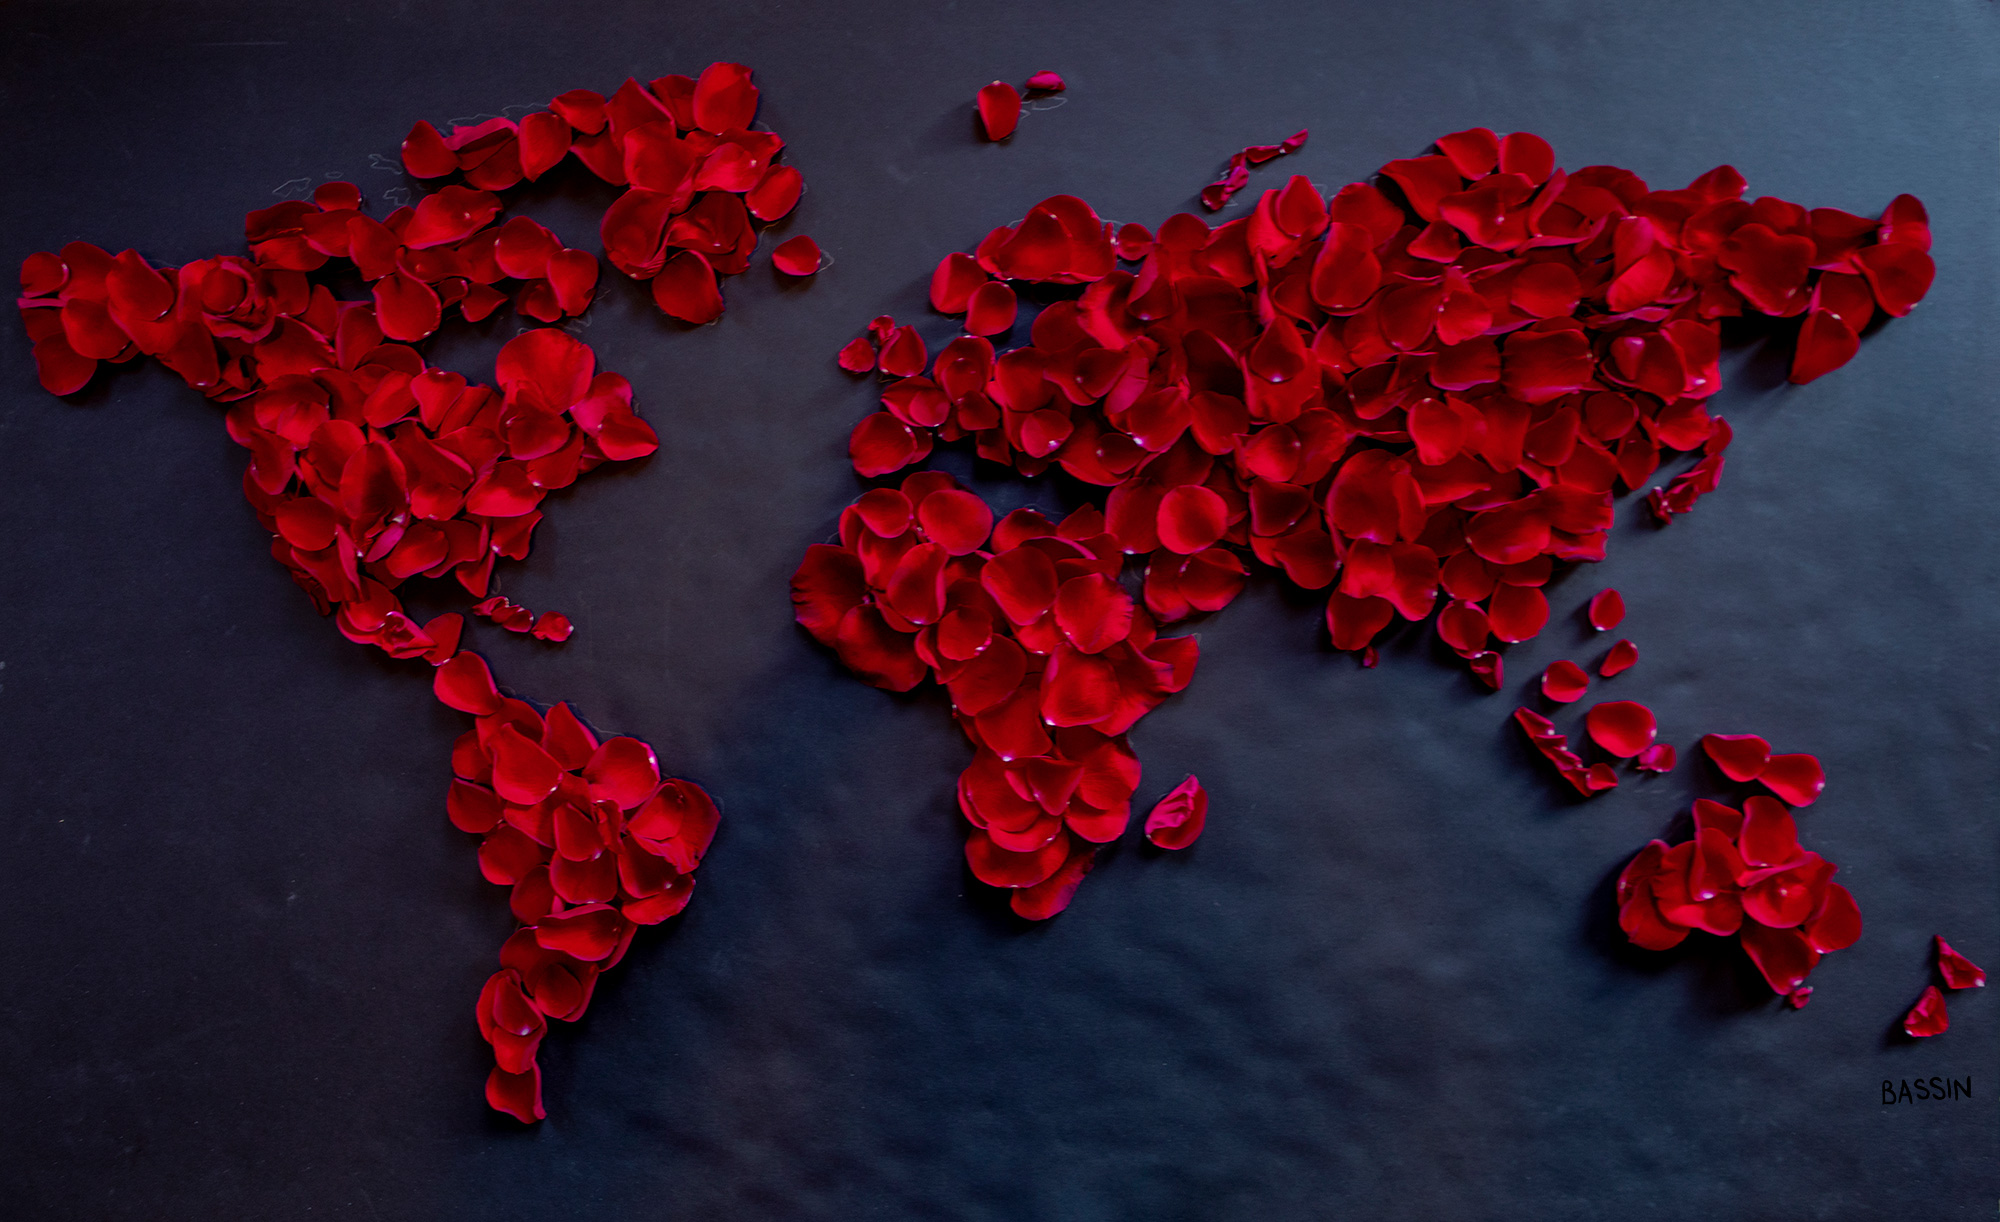 The meaning of red roses - Love all over the world - W+W red rose petals on black 2000 Charlotte Bassin Worldmap Ever Red Rose Petals on Thursd